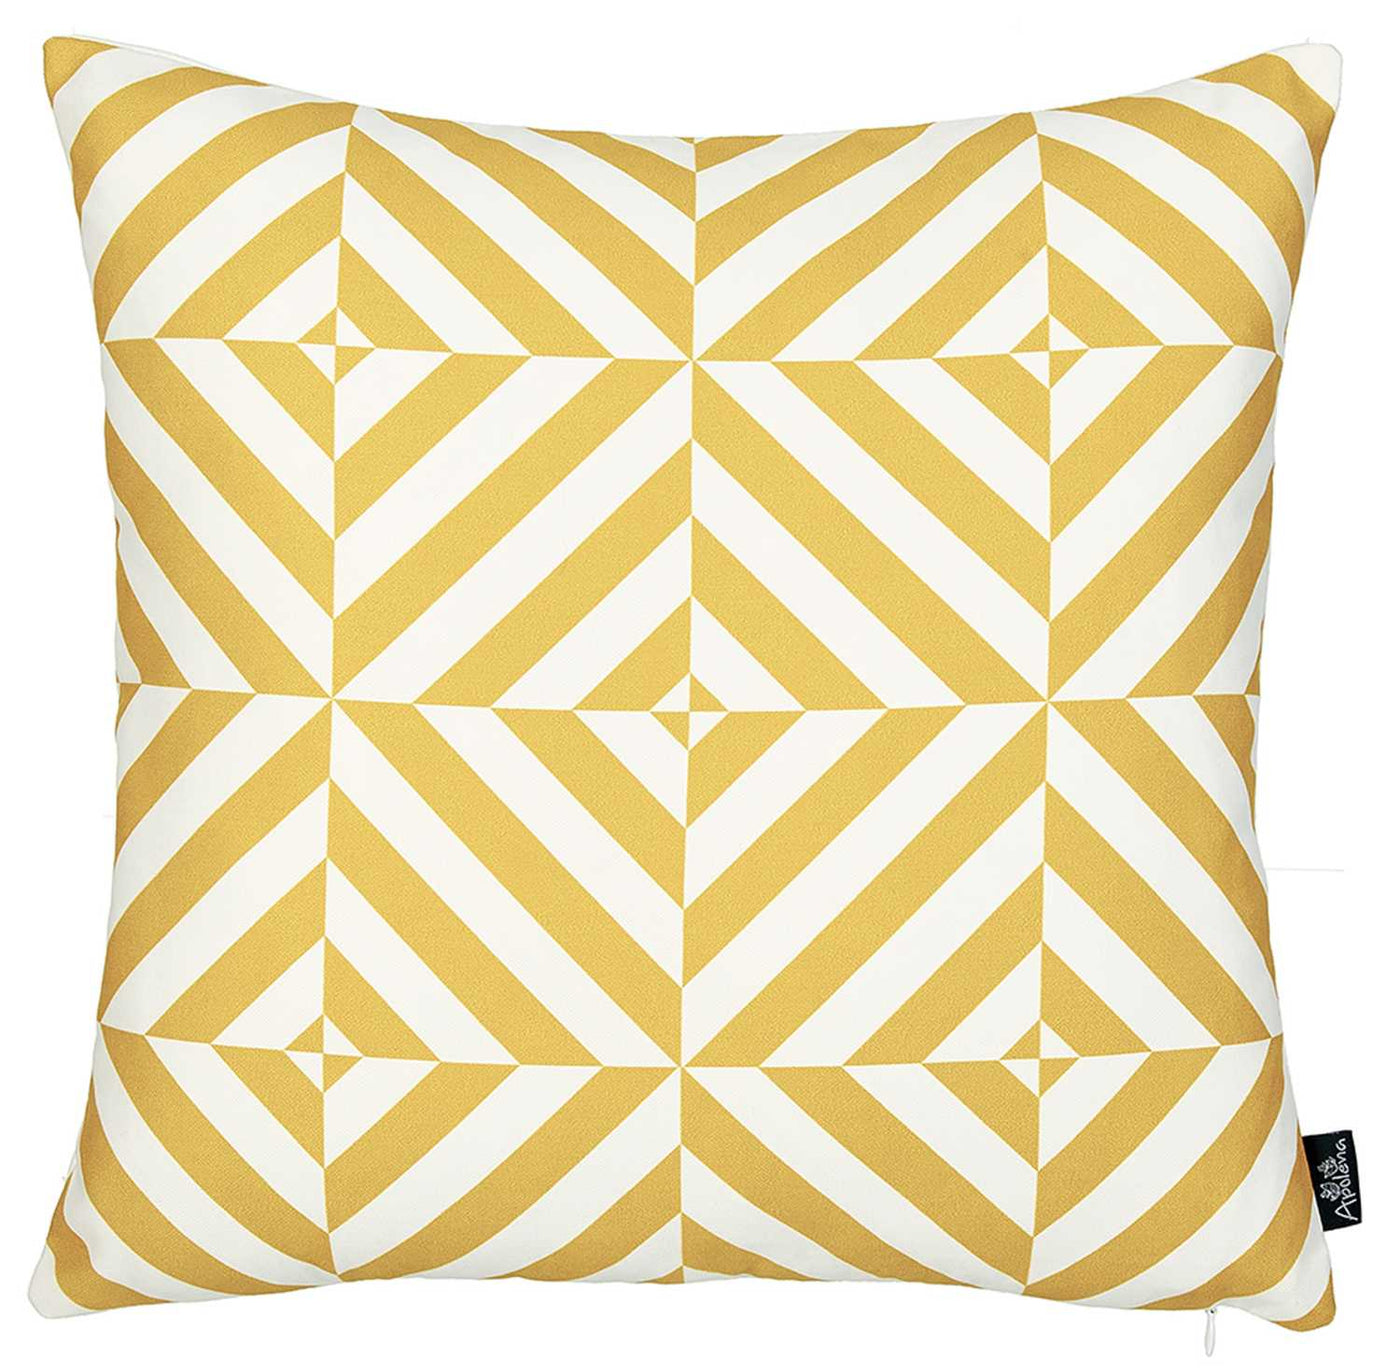 Yellow And White Geometric Squares Decorative Throw Pillow Cover - Accent Throw Pillows